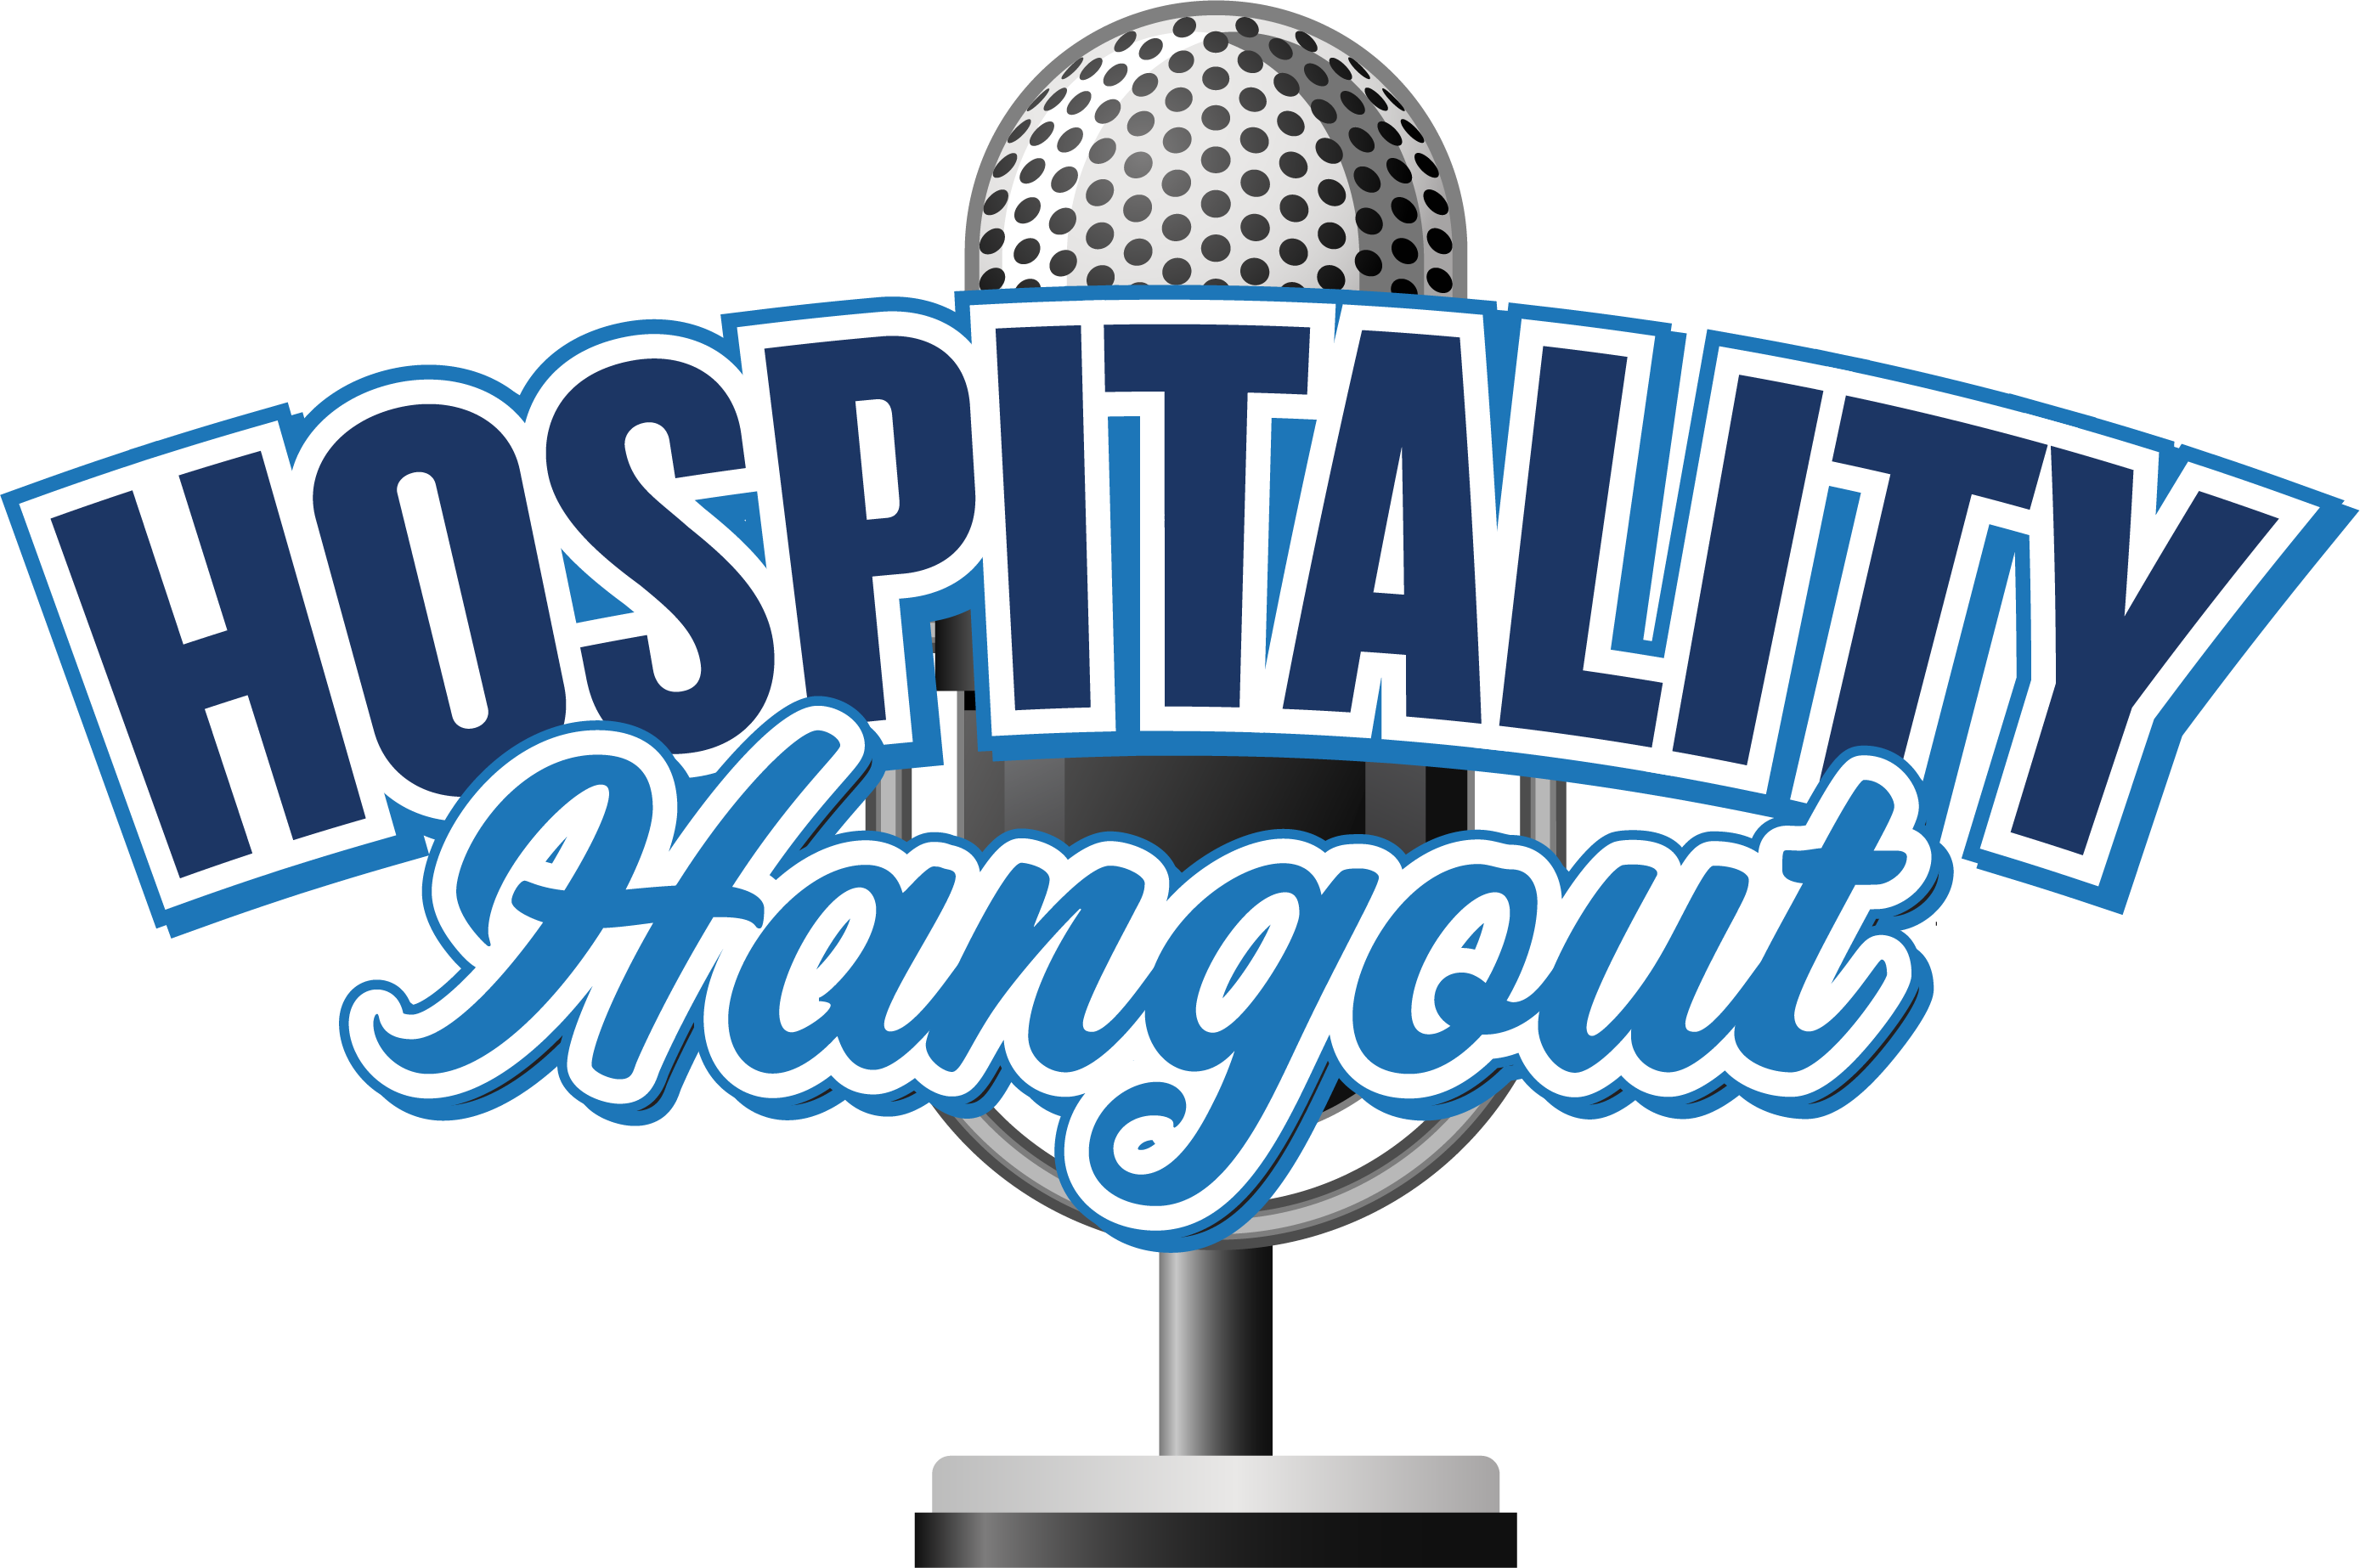 The Hospitality Hangout Podcast